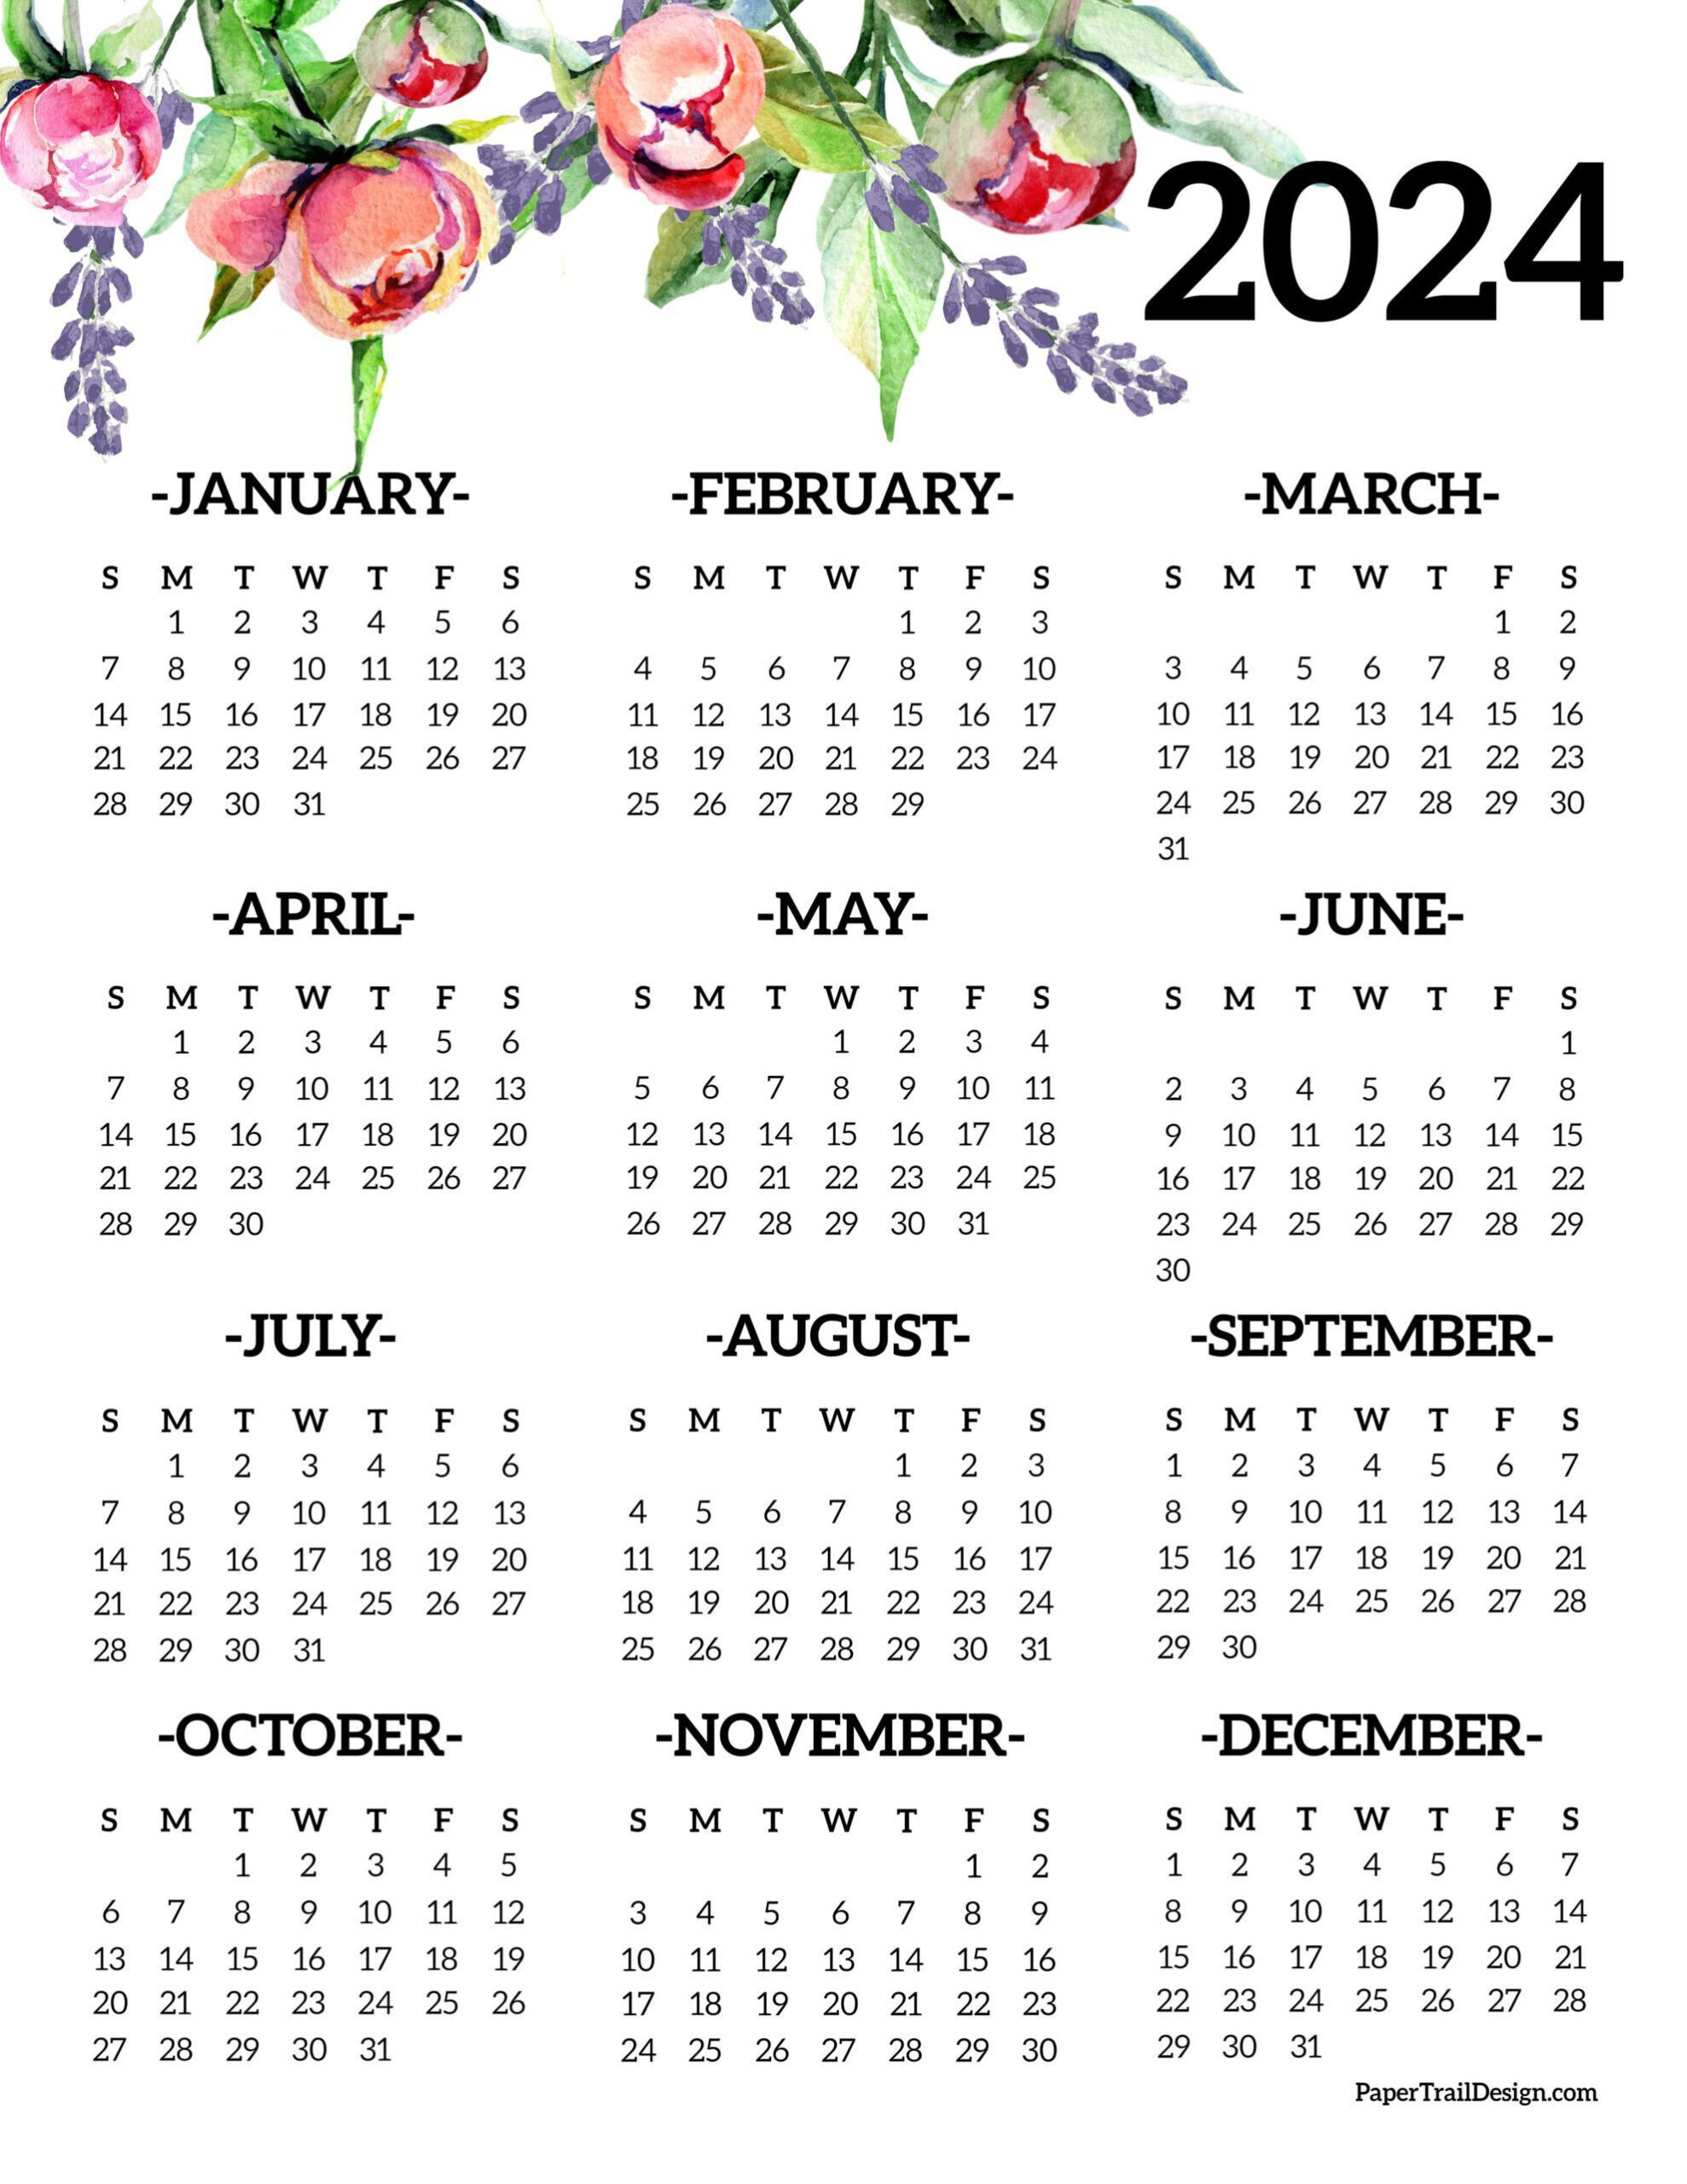 Calendar 2024 Printable One Page | Paper Trail Design In 2023 | Printable Calendar 2024 One Page